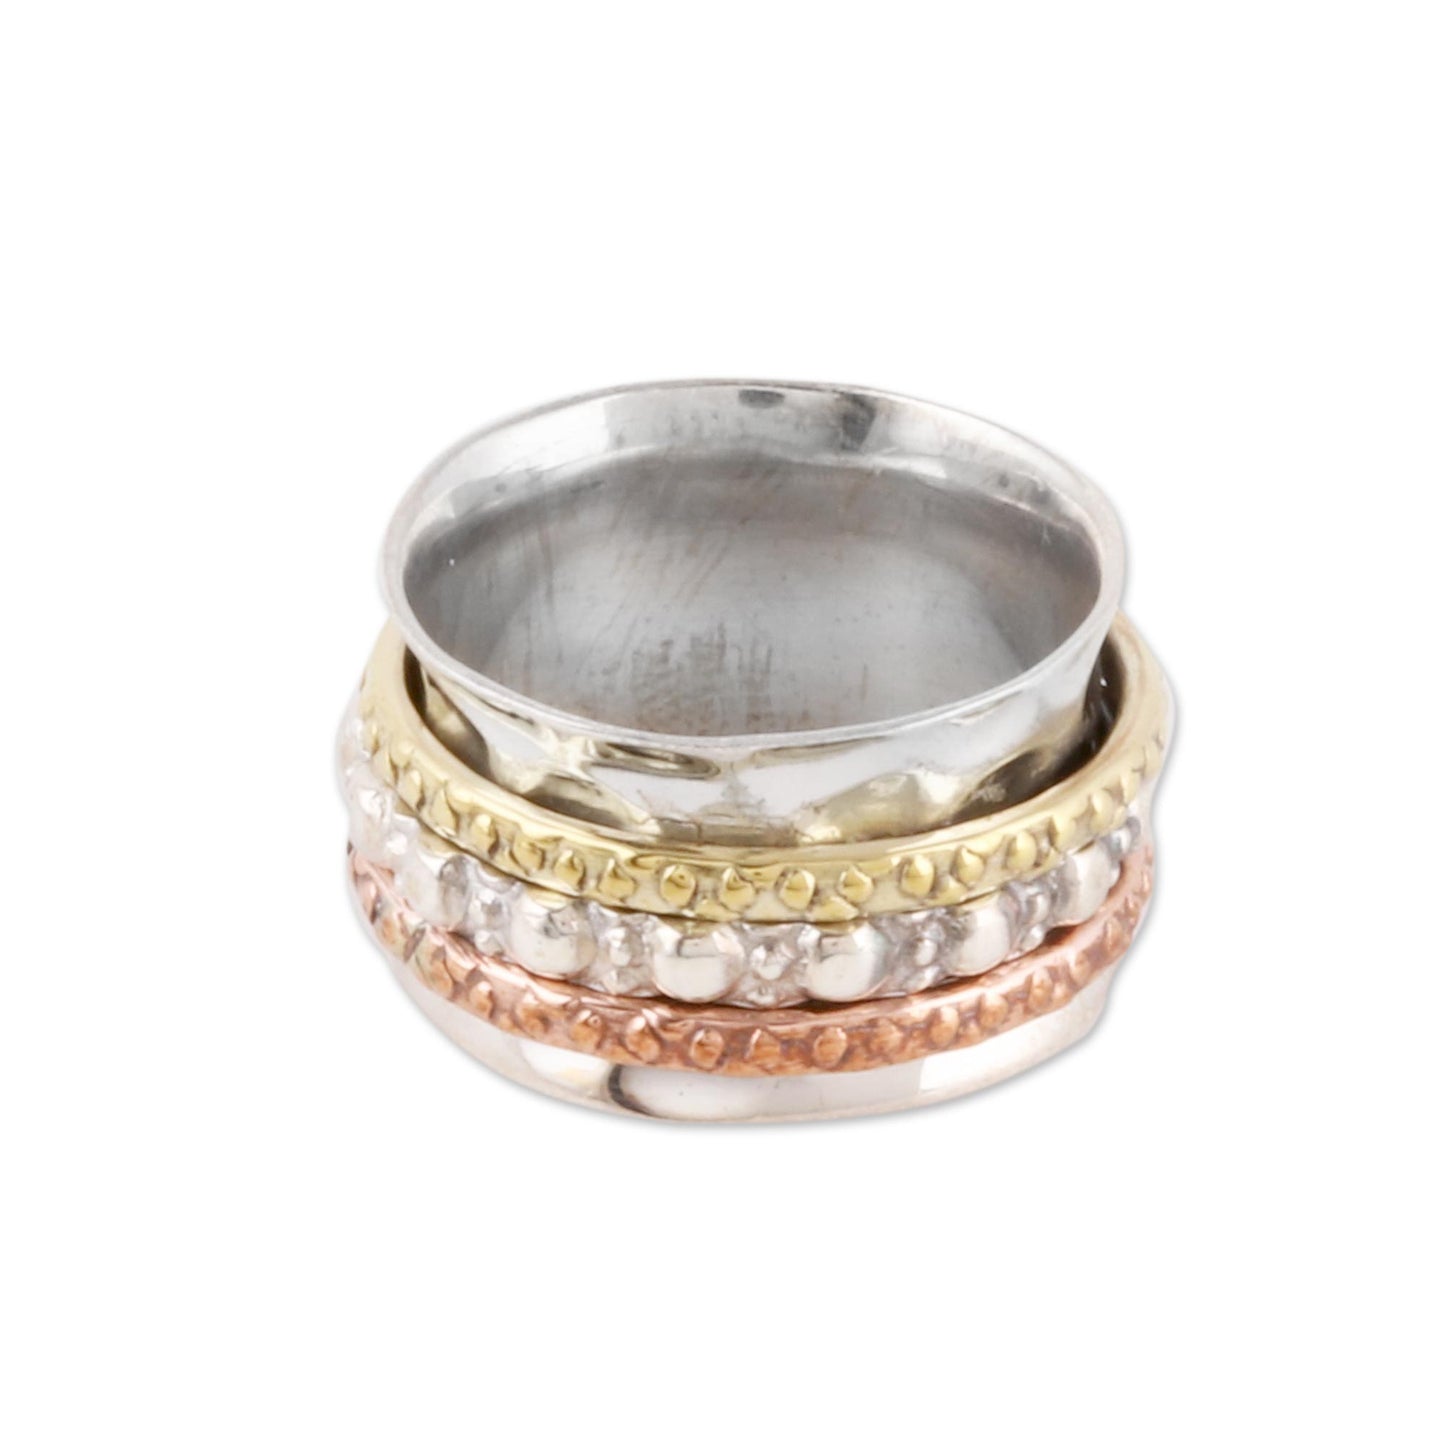 Mesmerizing Triple Textured Sterling Silver Spinner Ring from India